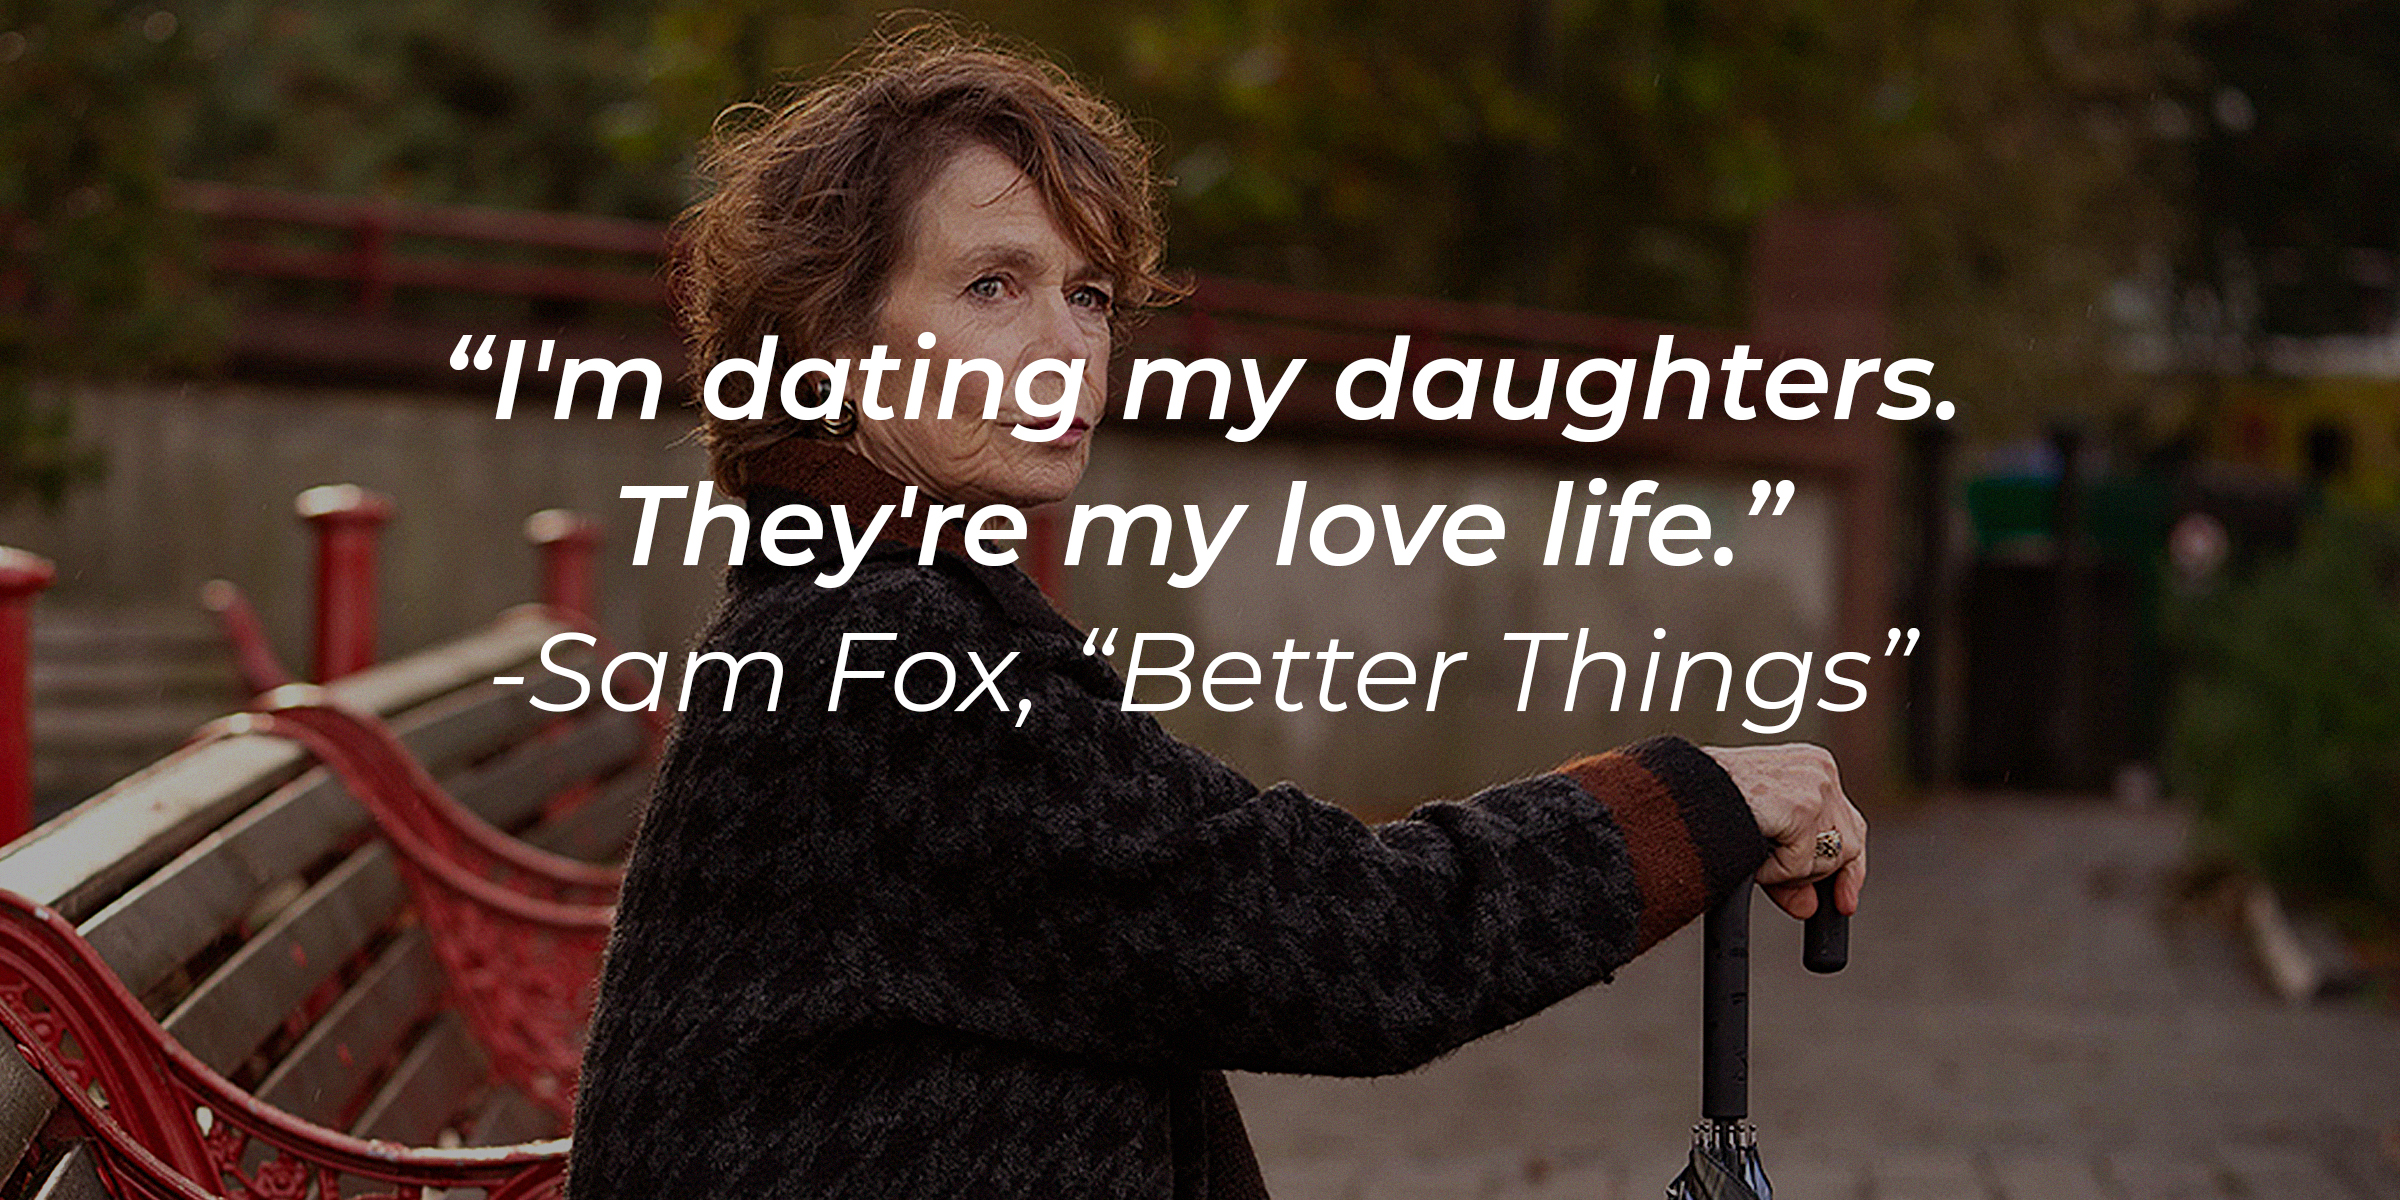 A photo of Phyllis Darby, with Sam Fox's quote: "I'm dating my daughters. They're my love life." | Source: facebook.com/BetterThingsFX